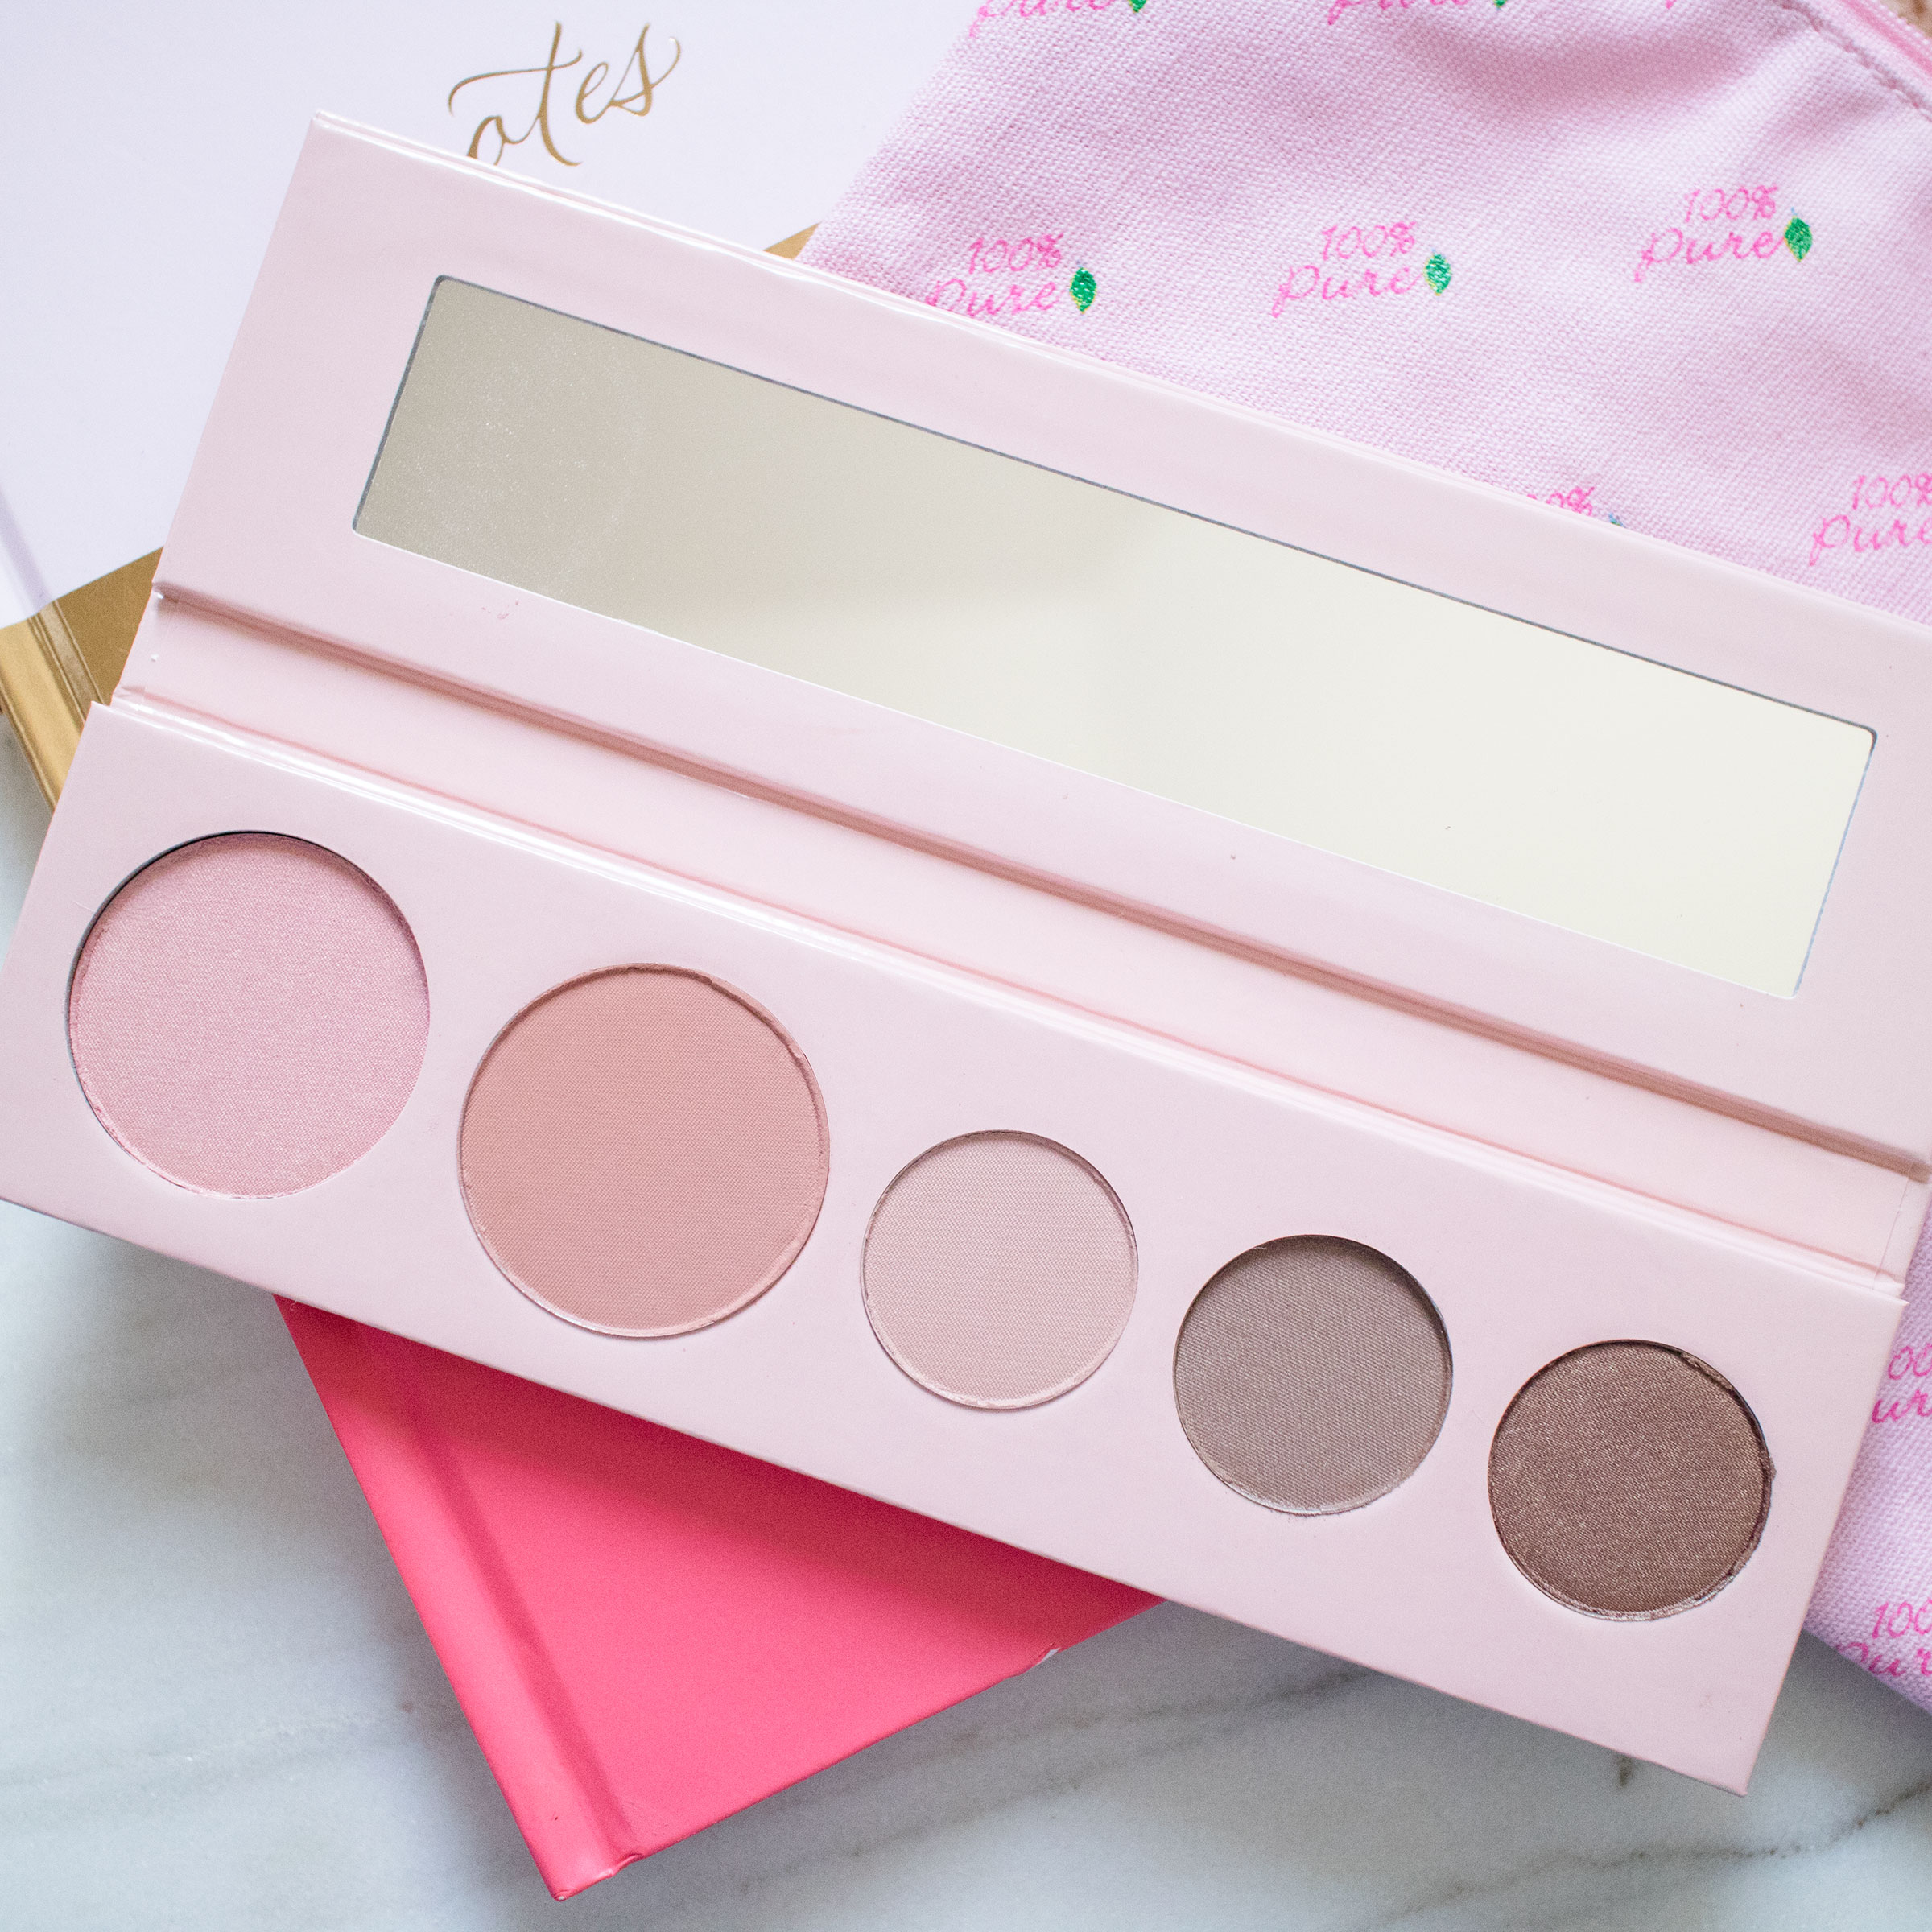 100% Pure | Fruit Pigmented Pretty Naked II Palette 